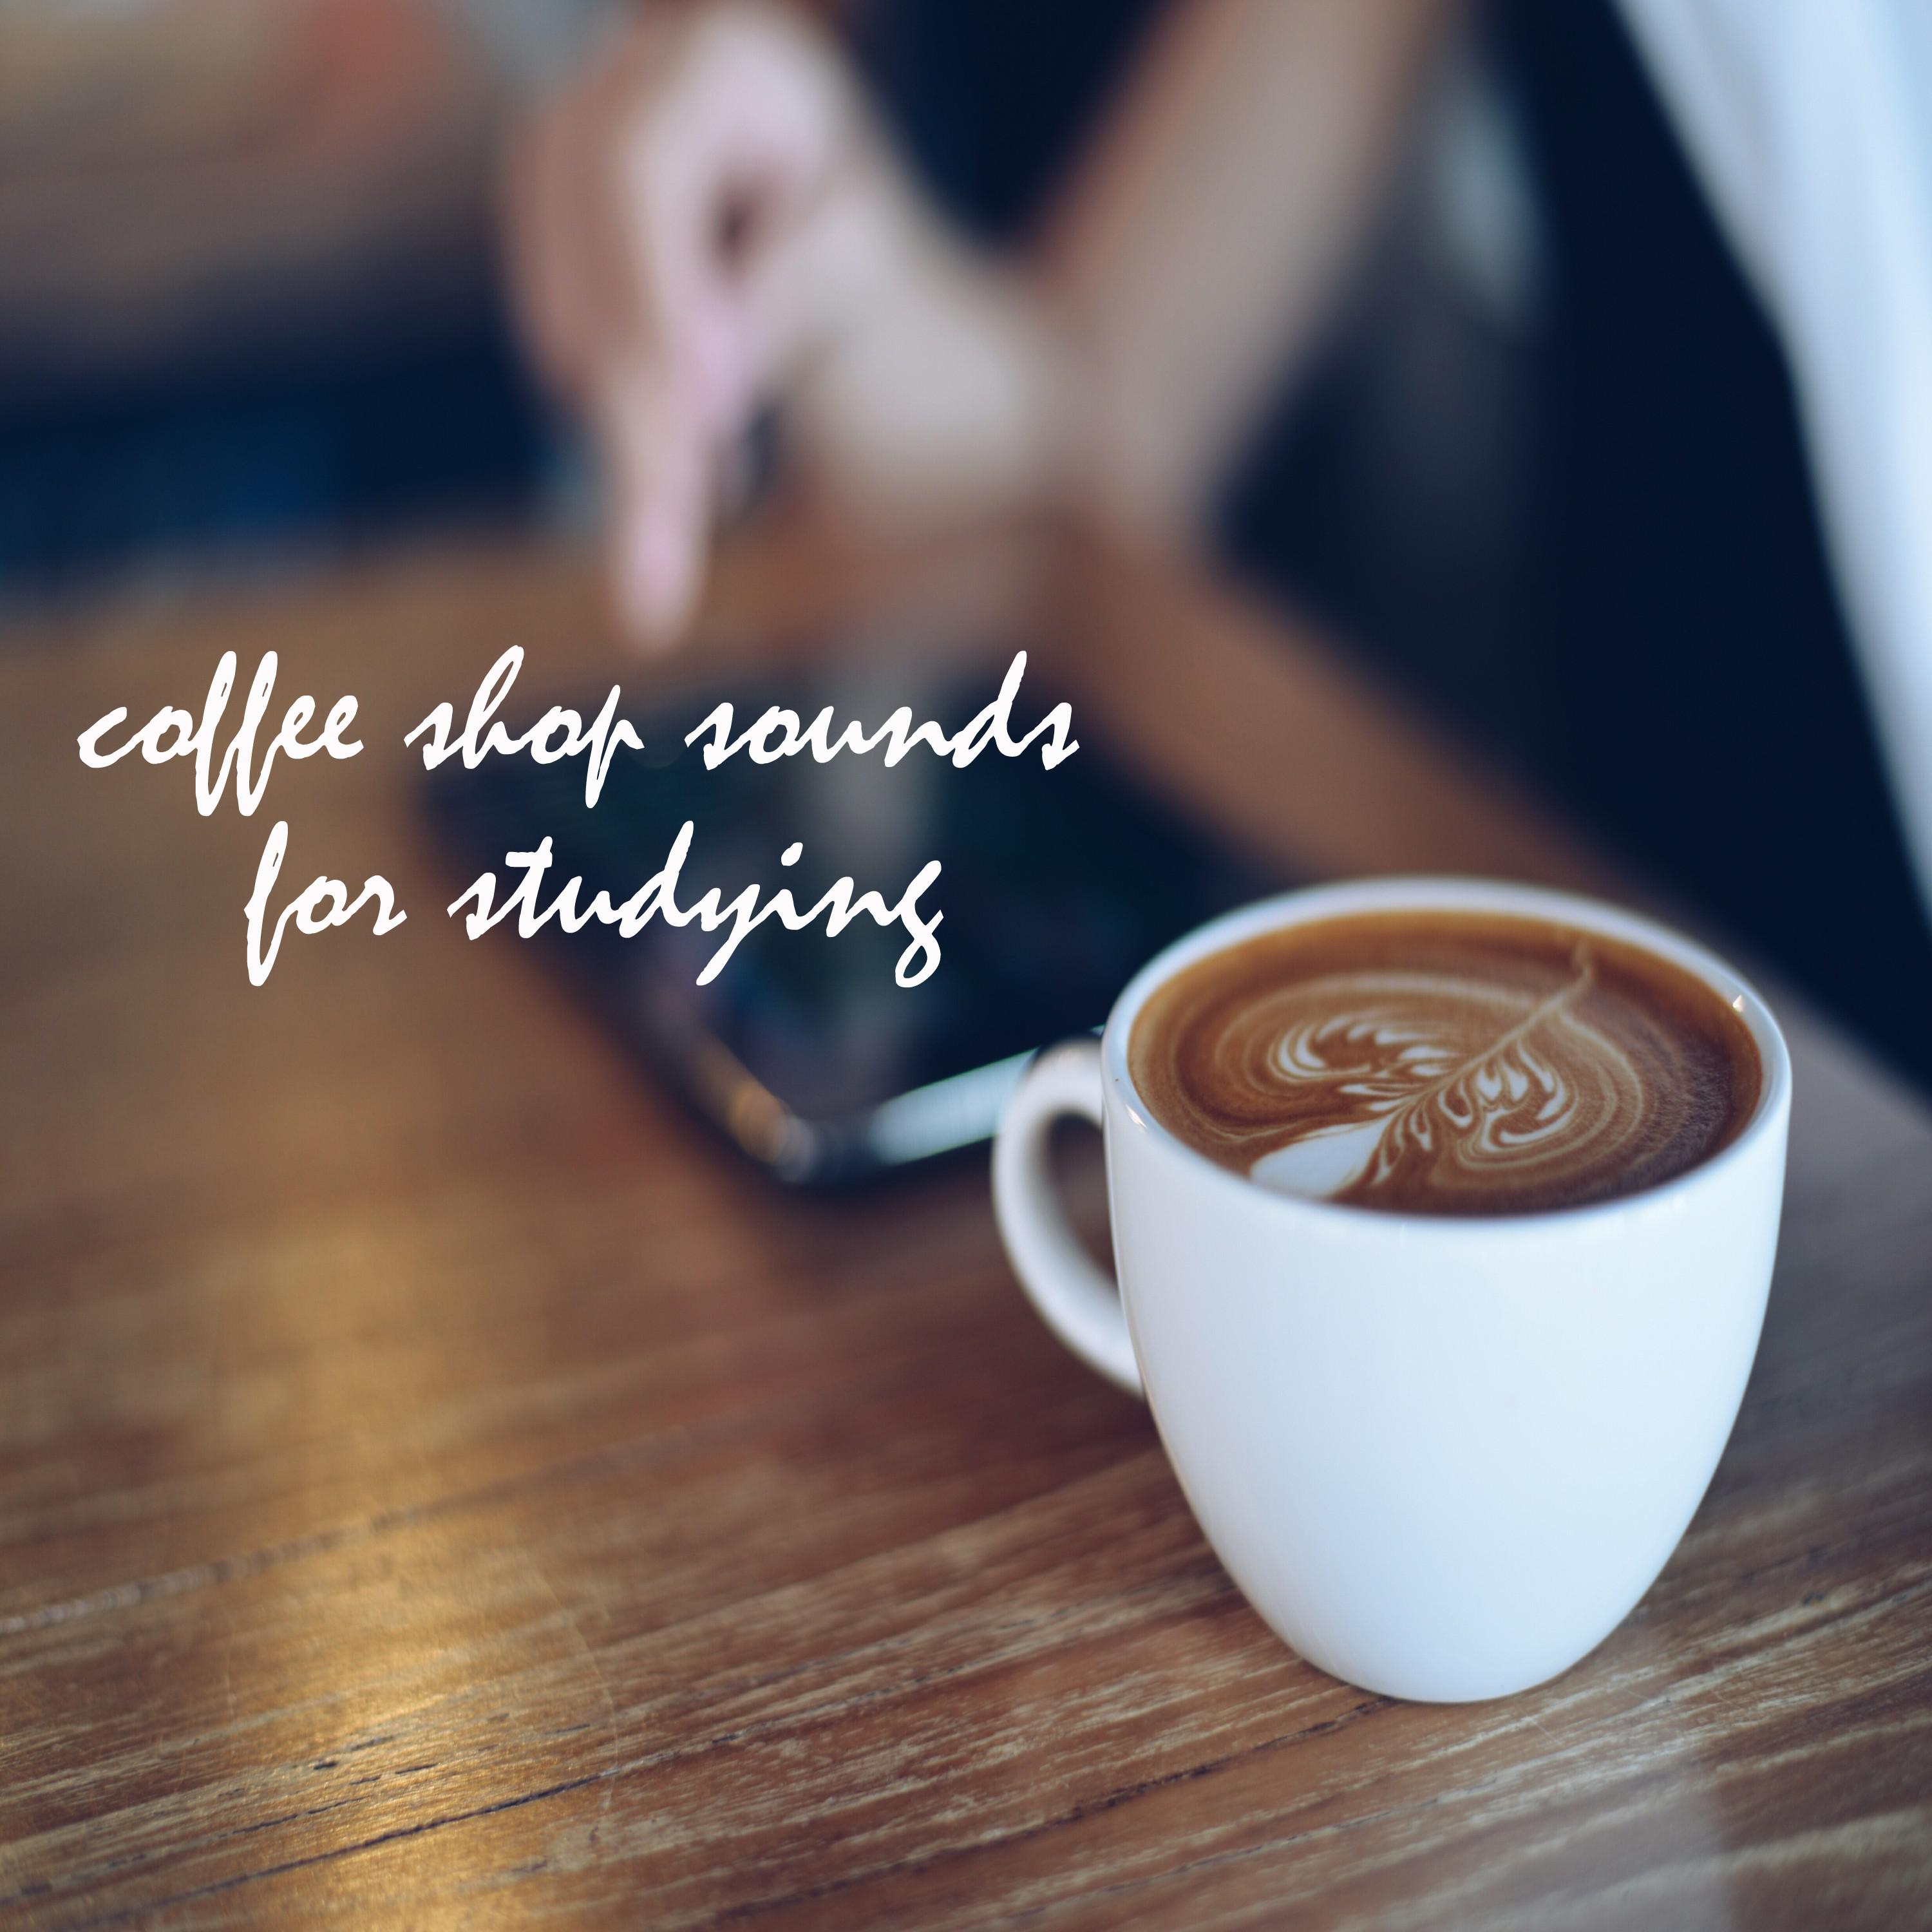 Coffee Shop Sounds for Studying and Working, Pt. 52